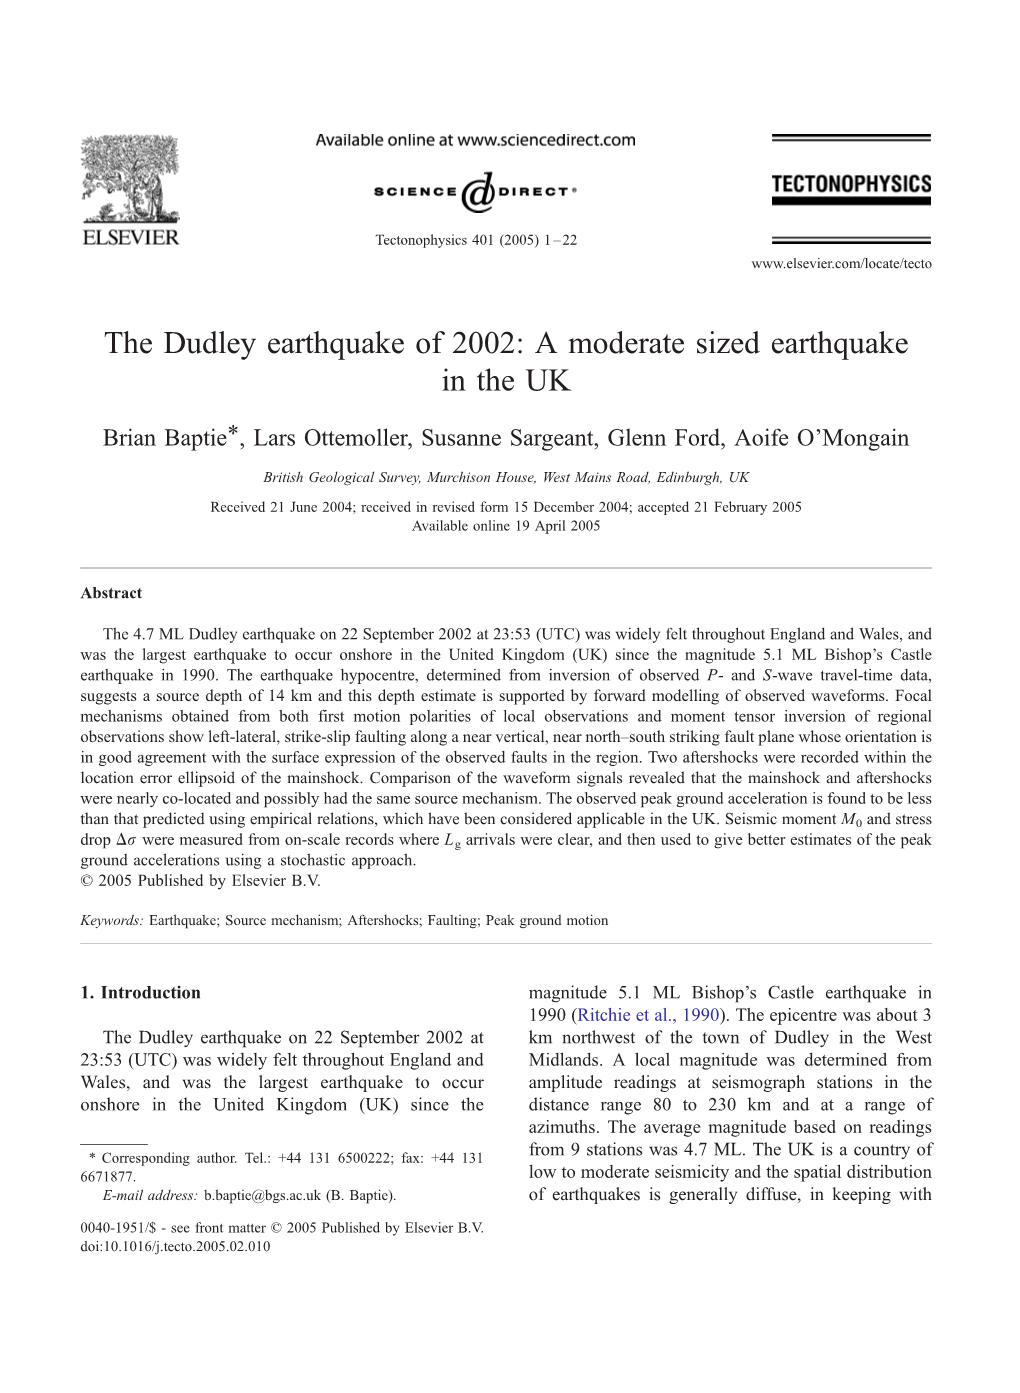 The Dudley Earthquake of 2002: a Moderate Sized Earthquake in the UK